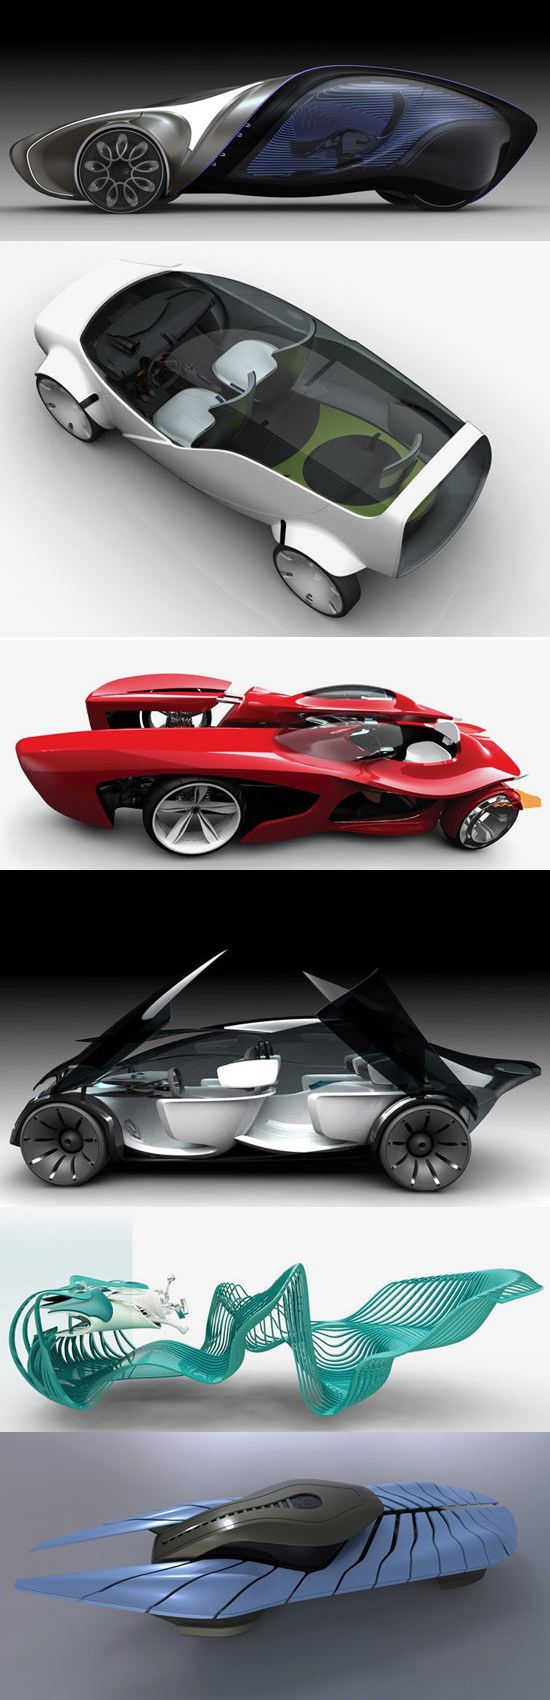 latest vehicle design concepts from RCA